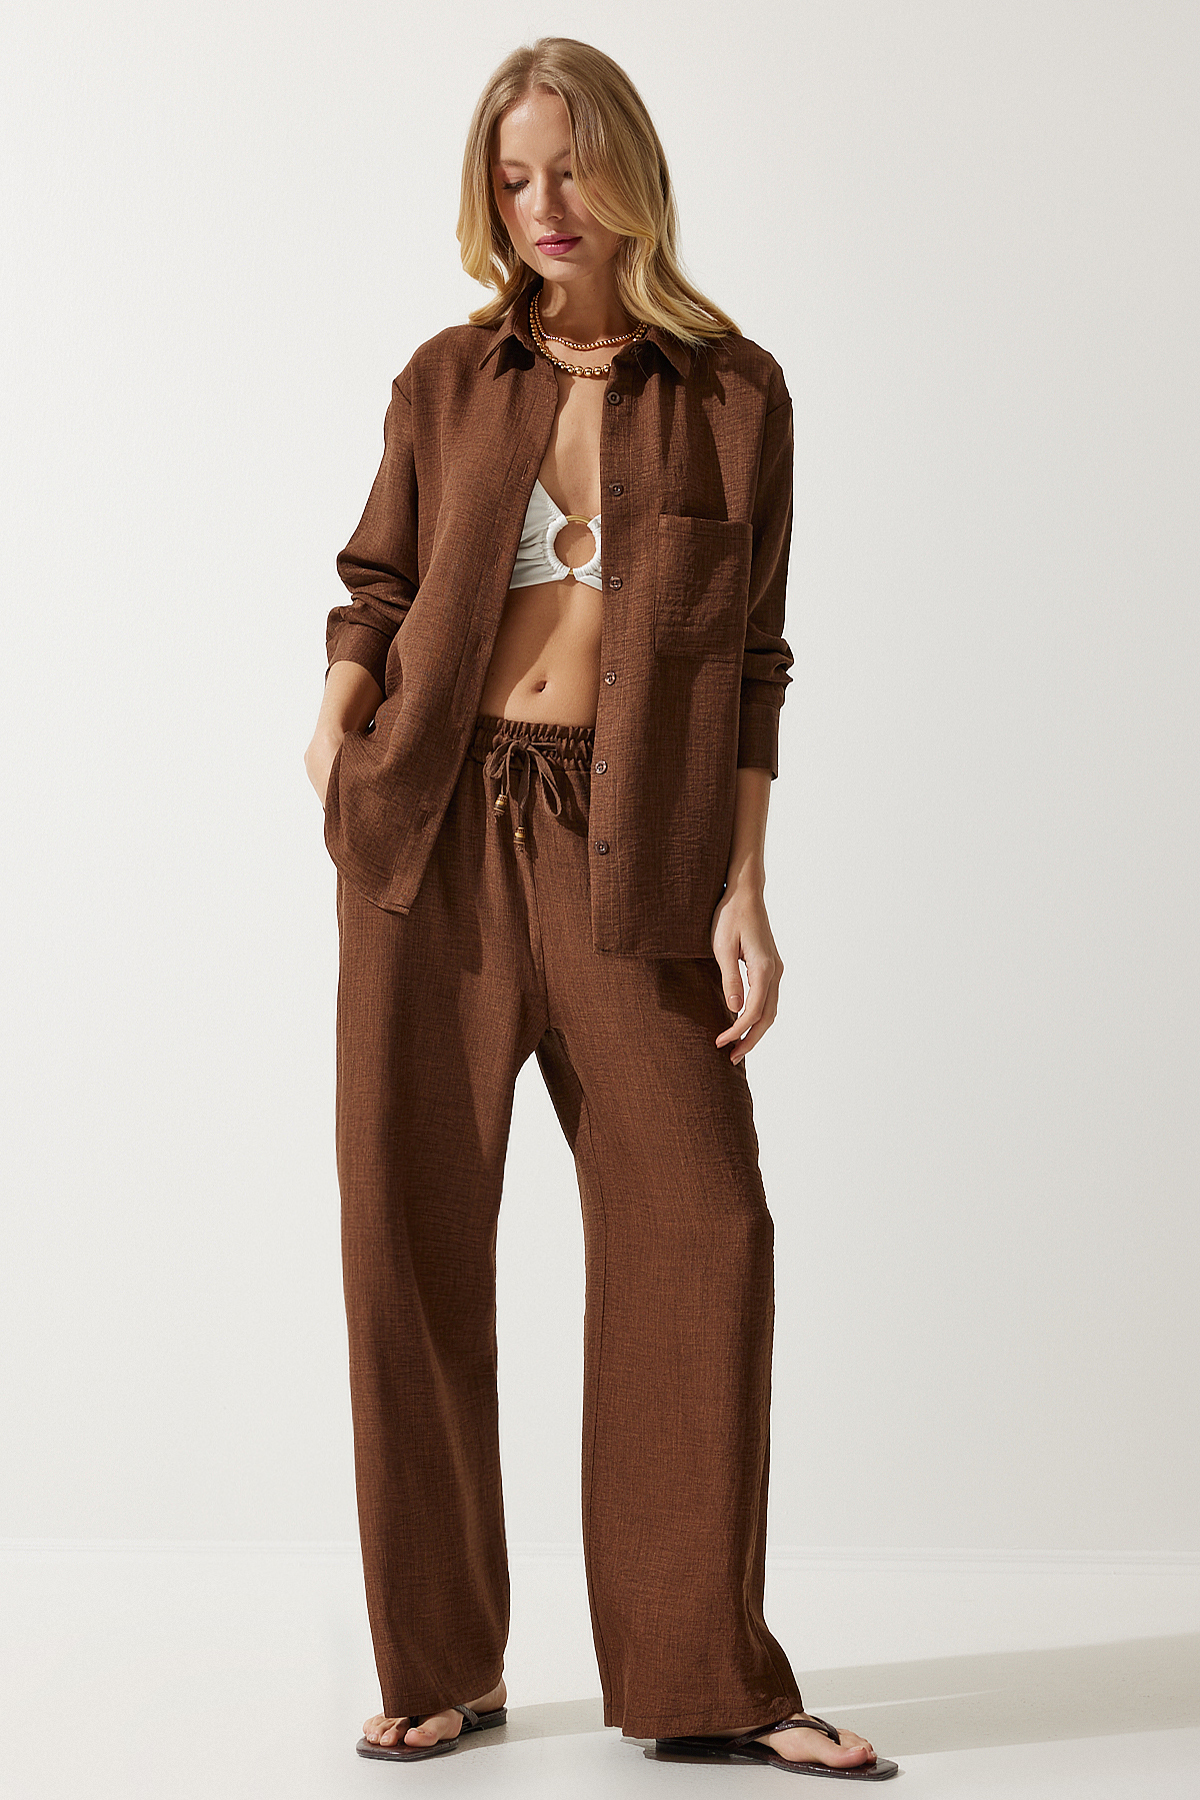 Happiness İstanbul Women's Brown Oversize Shirt Wide Trousers Suit